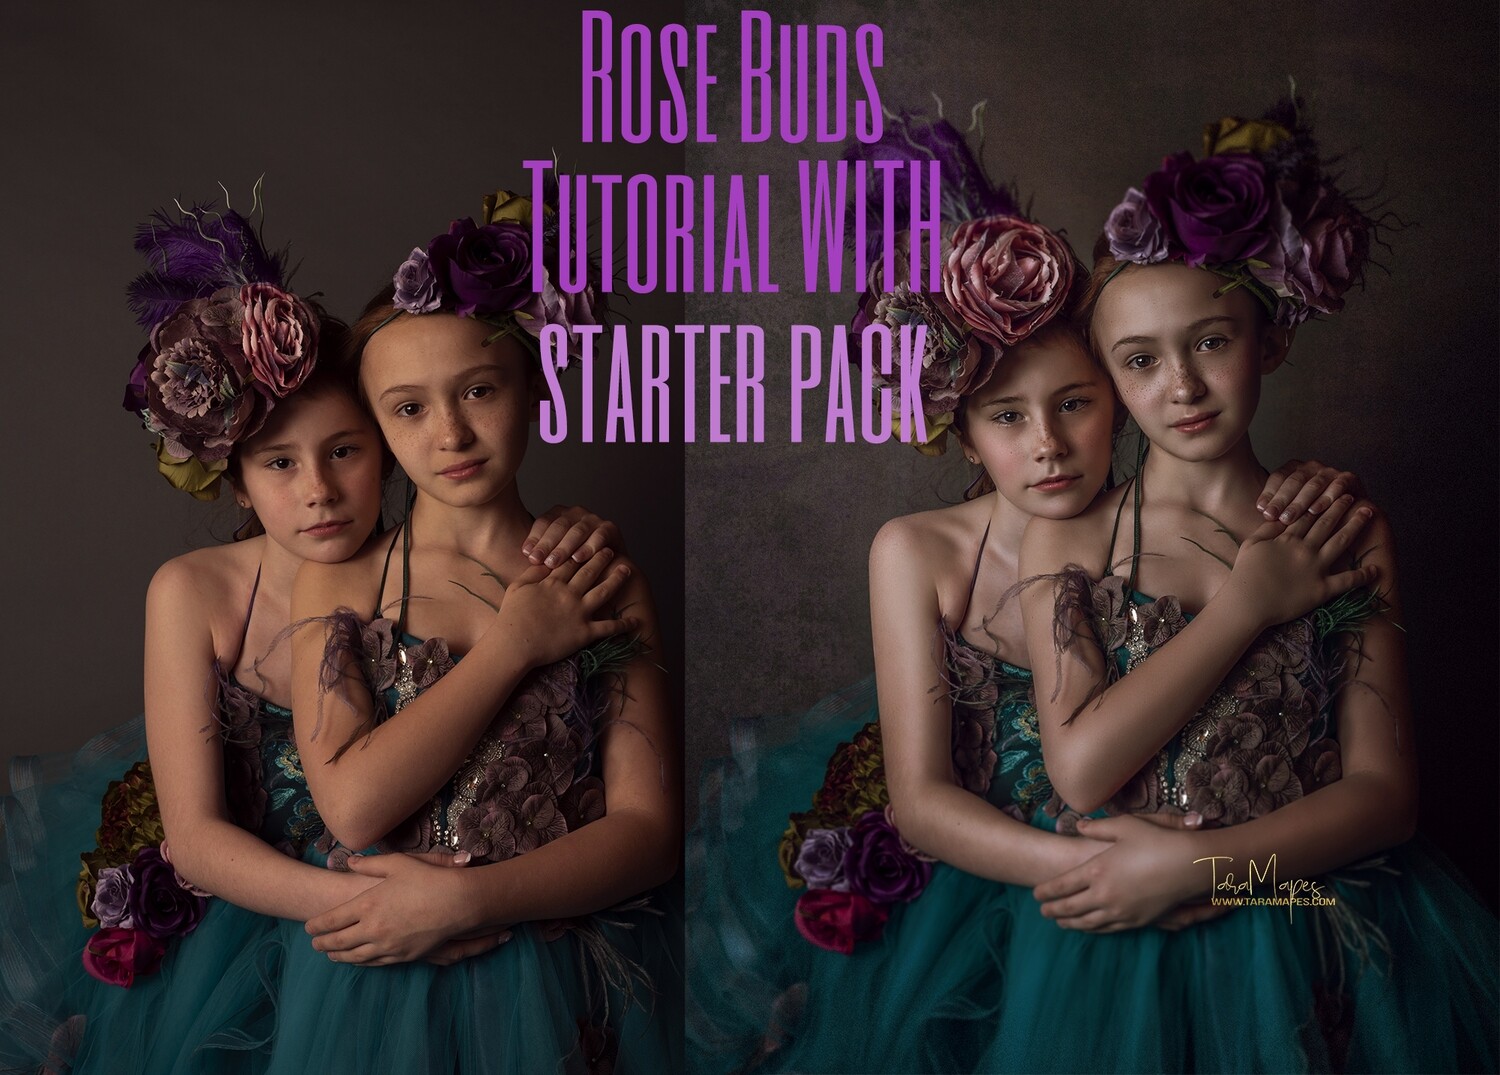 Rose Buds Fine Art Painterly Photoshop Tutorial WITH STARTER PACK- Fine Art Tutorial by Tara Mapes